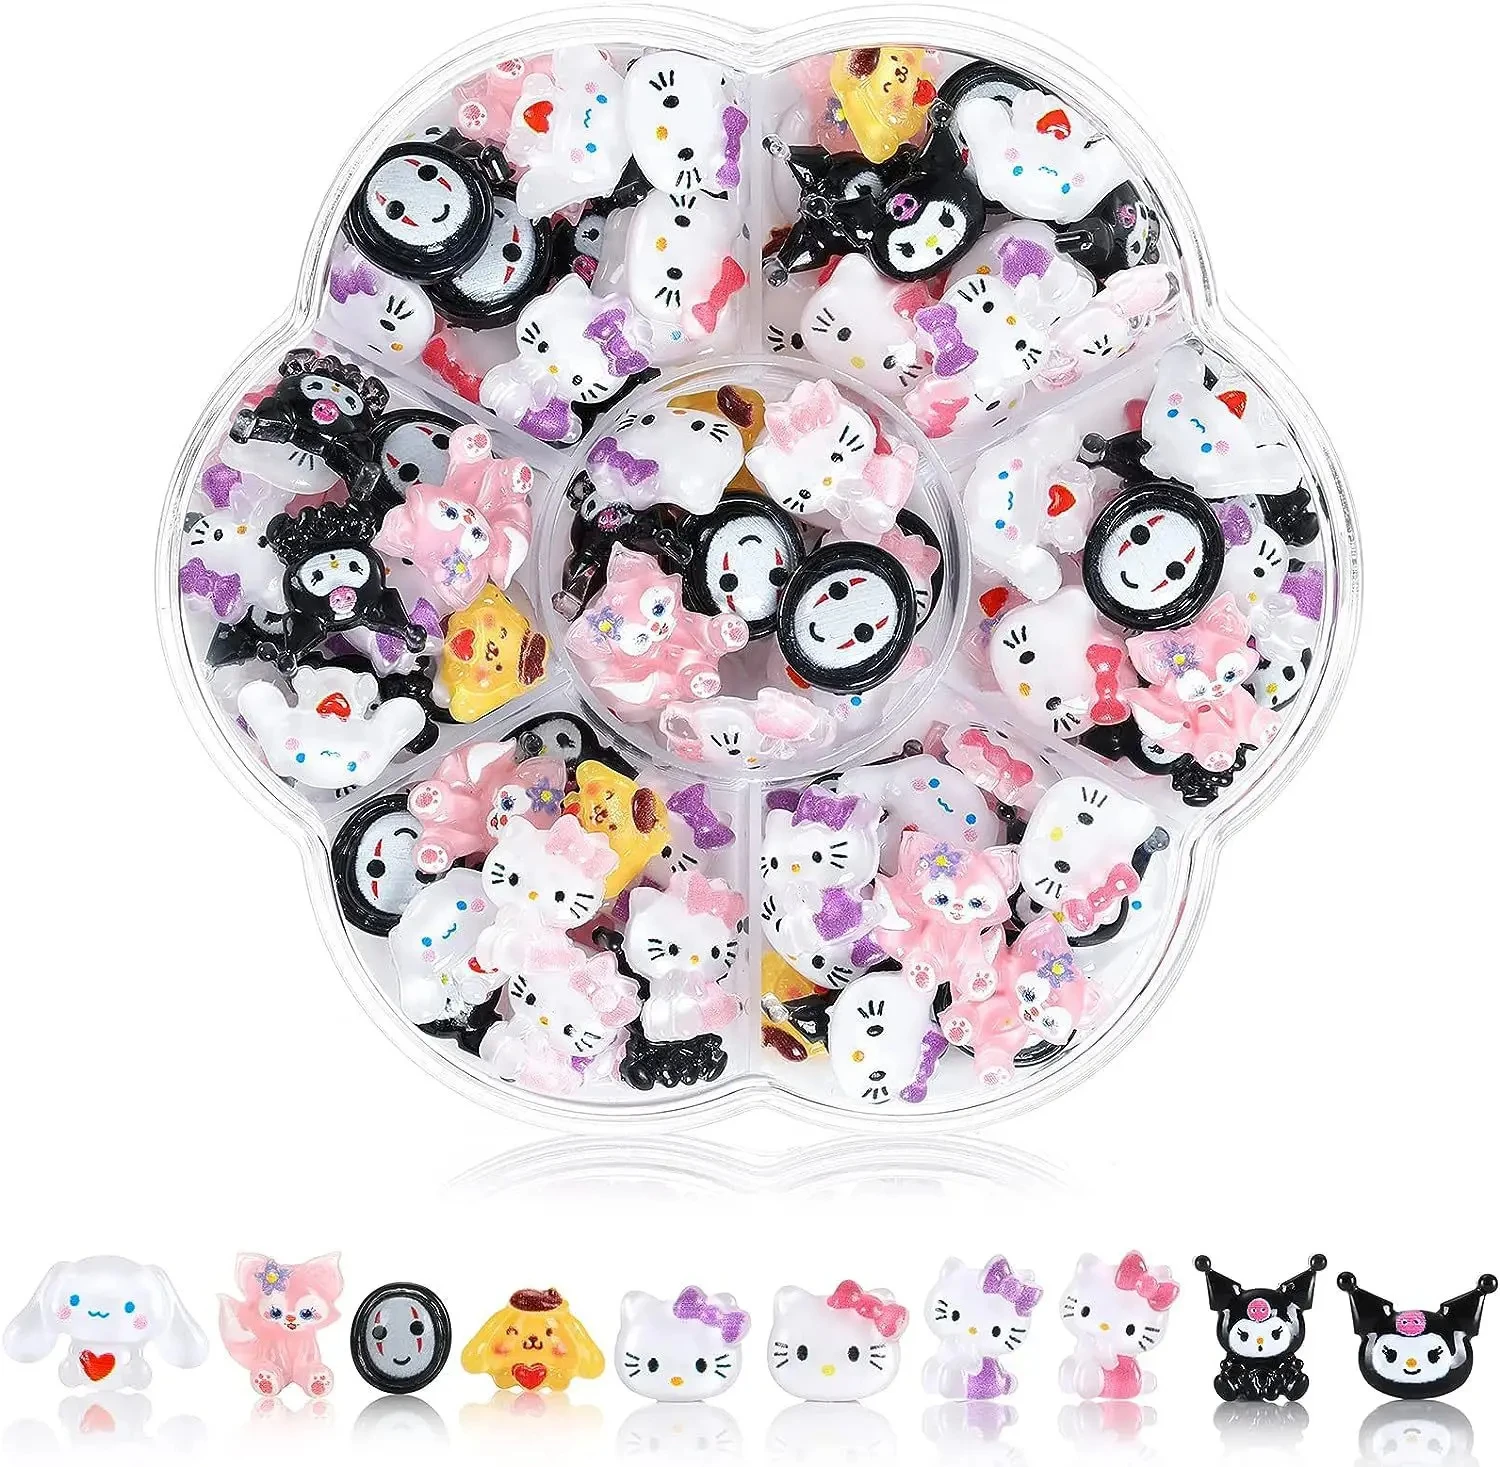 70Pcs/box Sanrio Fake Nail Jewelry Set Cartoon Hello Kitty Cinnamoroll Mymelody Diy Anime Accessories Charms Gems Kit Diy Crafts new fashion bracelet holder stand display wedding ring organizer packaging wholesale for woman jewelry shop show shelf fake hand